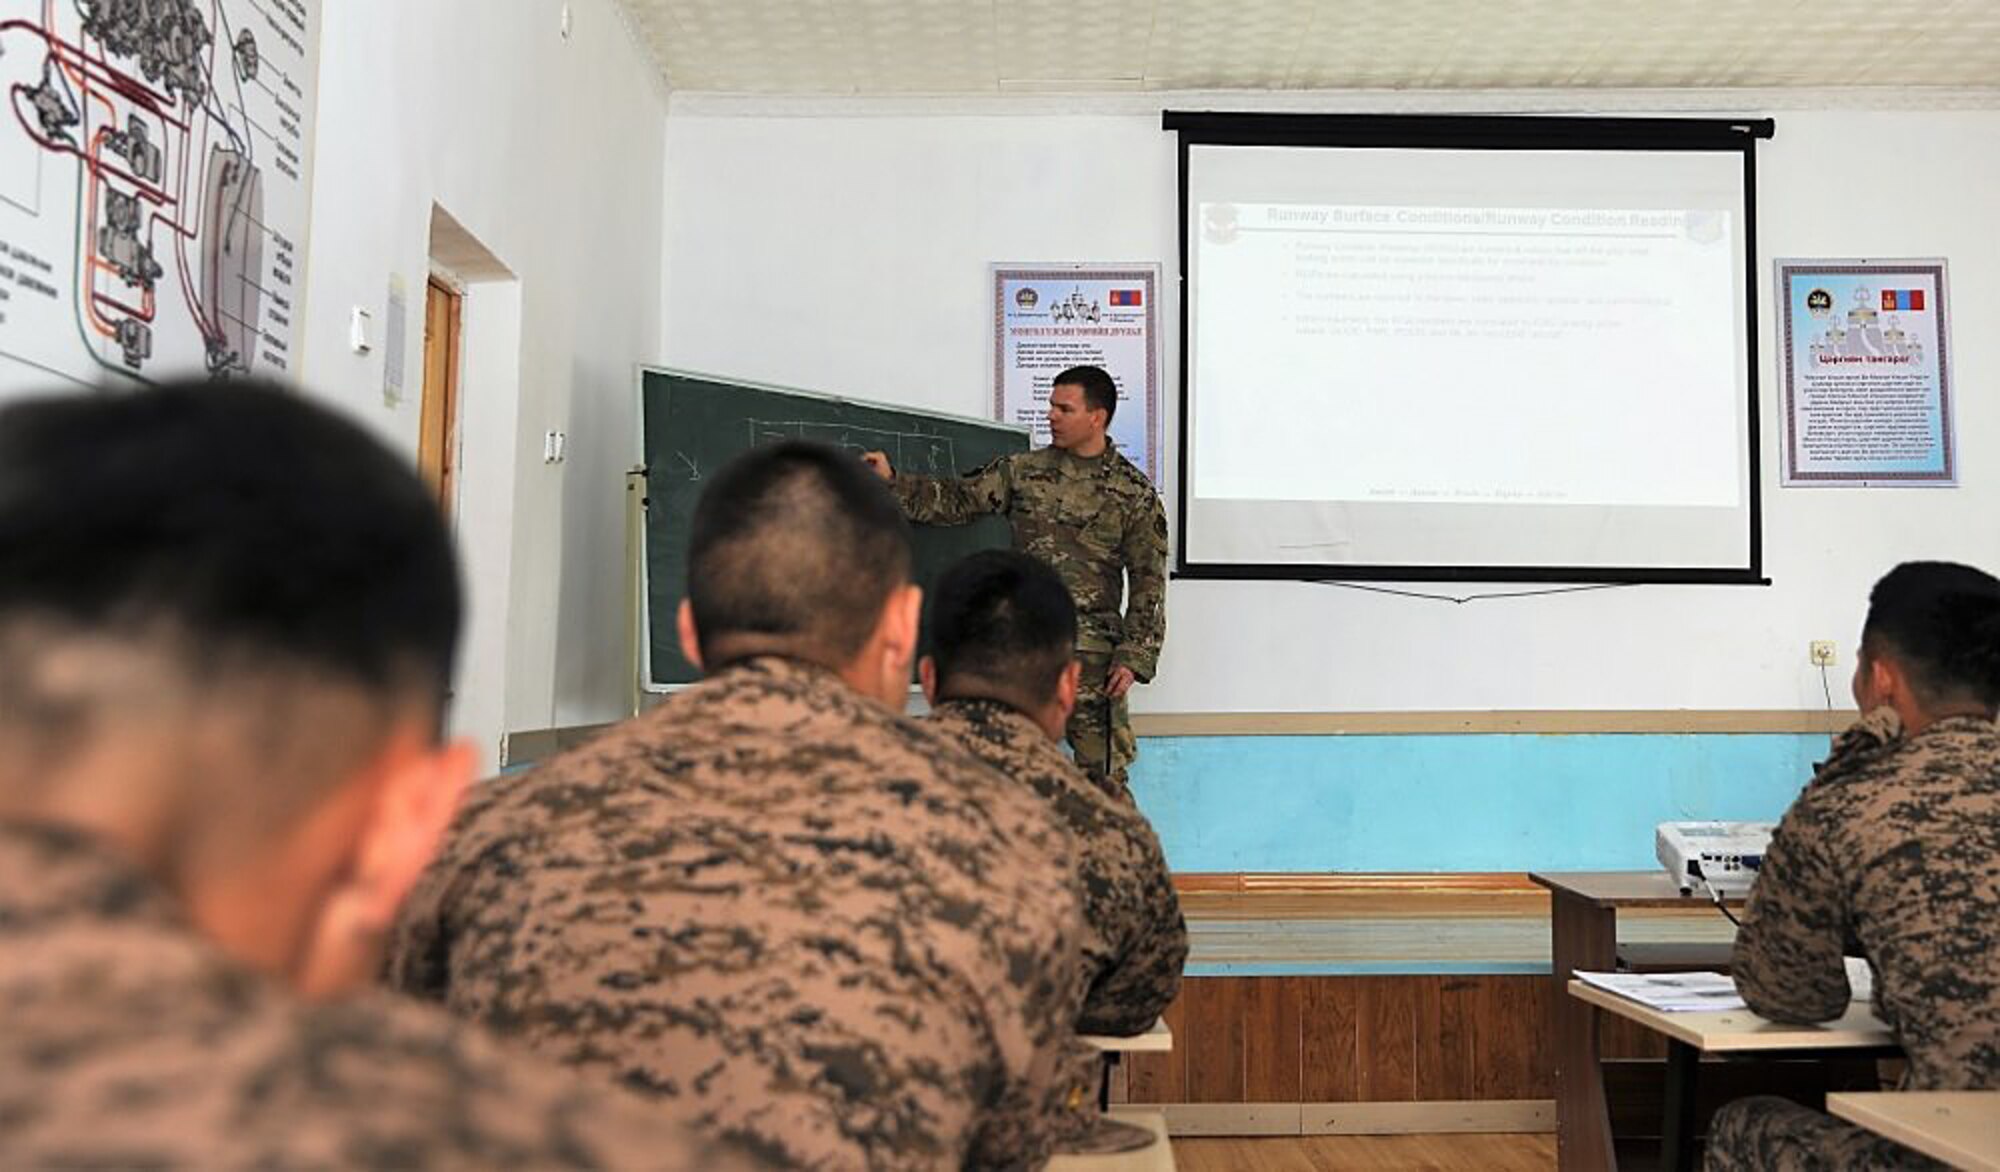 U.S. Air Force Master Sgt. Mark Hoover, 36th Contingency Response Support Squadron air advisor, shares his expertise on runway conditions during a subject-matter expert exchange, July 24, 2019 in Ulaanbaatar, Mongolia as part of Pacific Angel 2019.